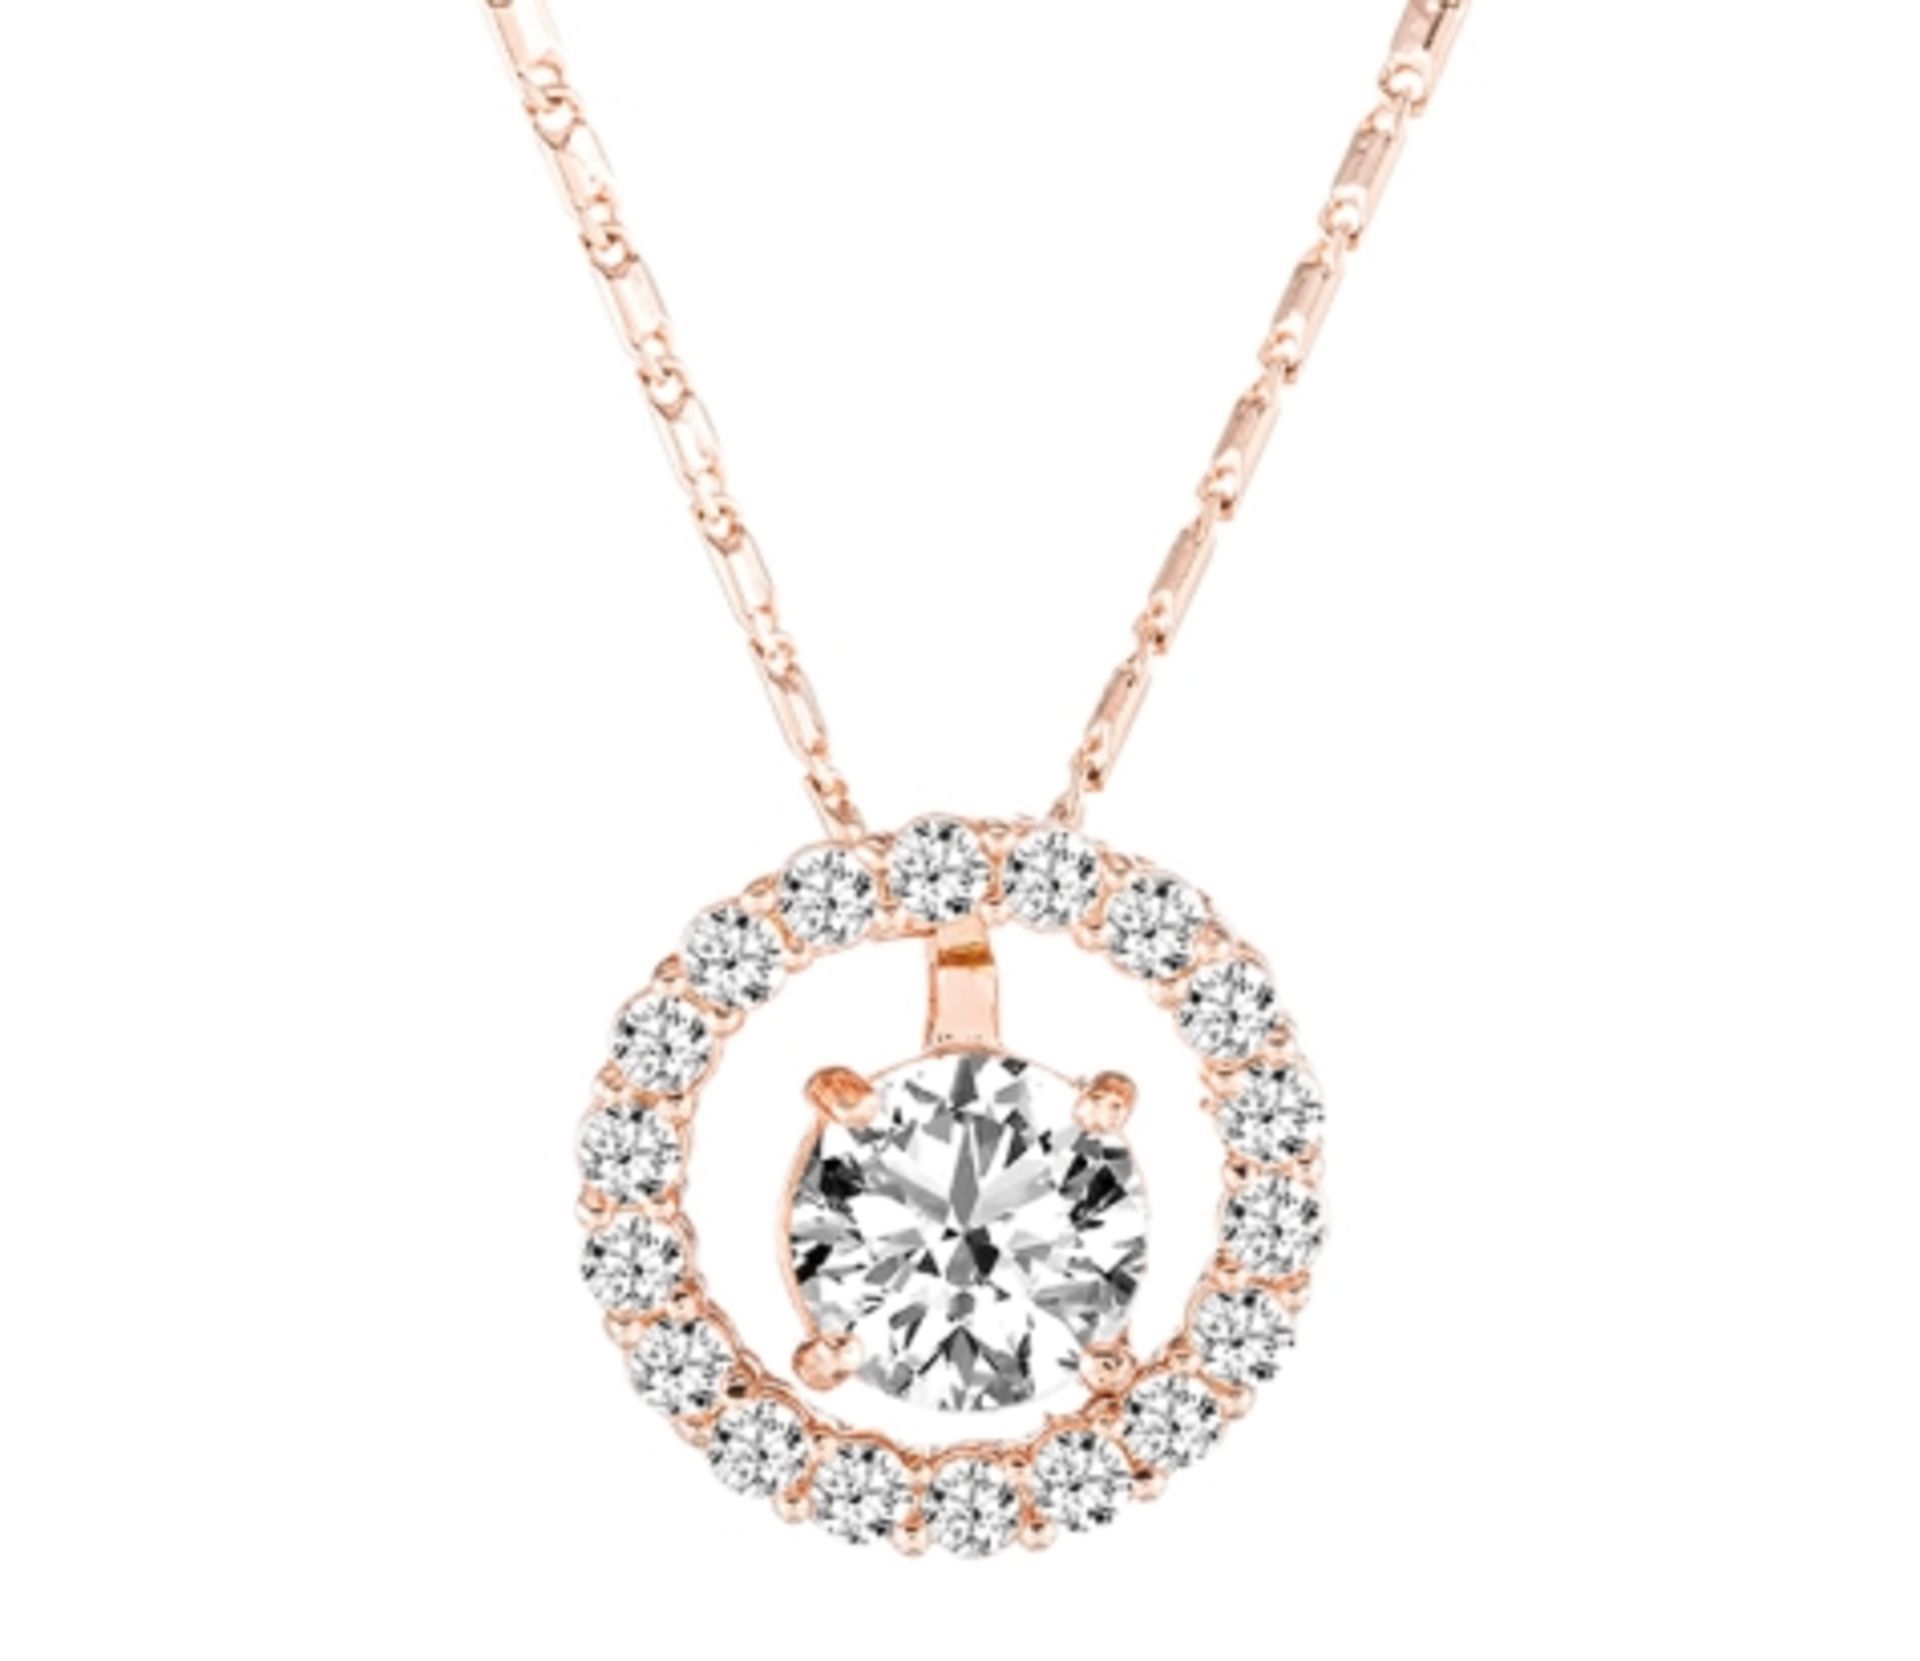 6 X BRAND NEW DIAMONDSTYLE LONDON SOLSTICE PENDANT IN ROSE GOLD RRP £100 EACH